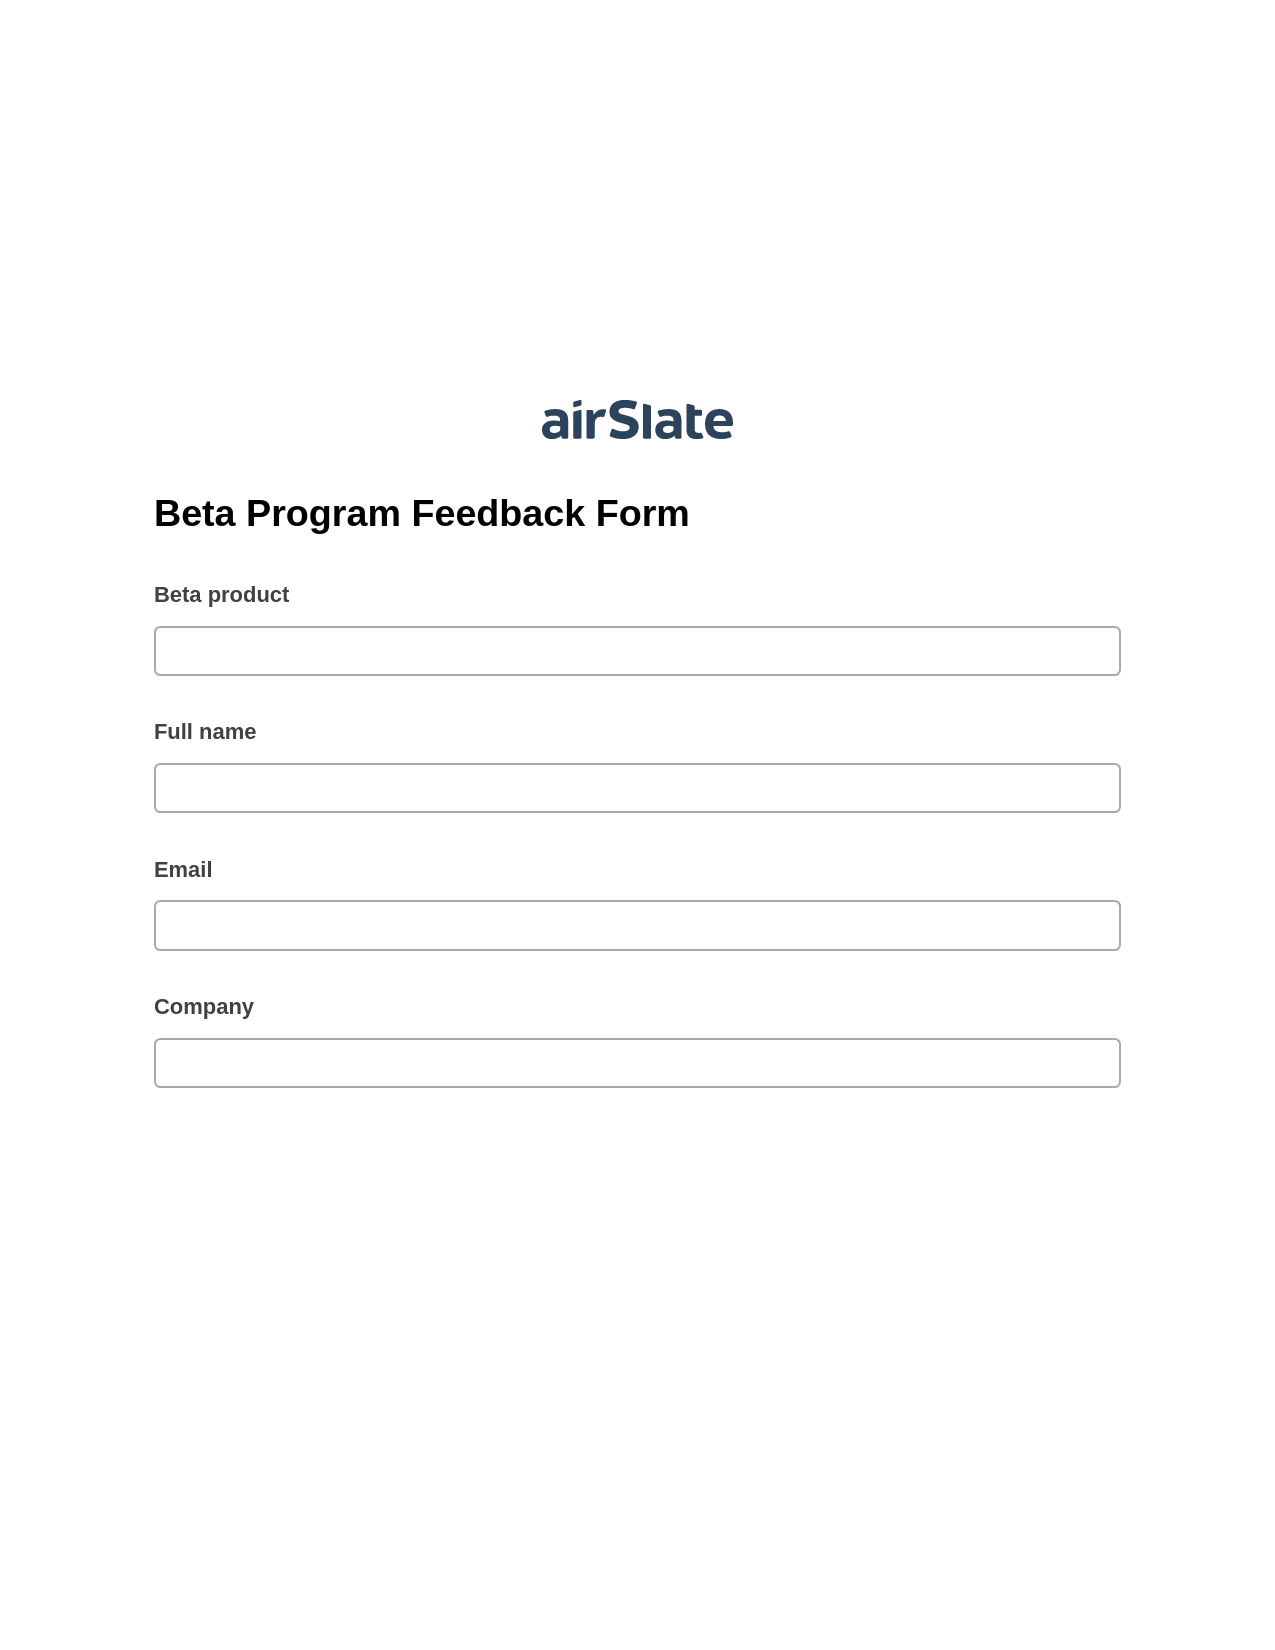 Beta Program Feedback Form Pre-fill from Excel Spreadsheet Bot, Roles Reminder Bot, Email Notification Postfinish Bot